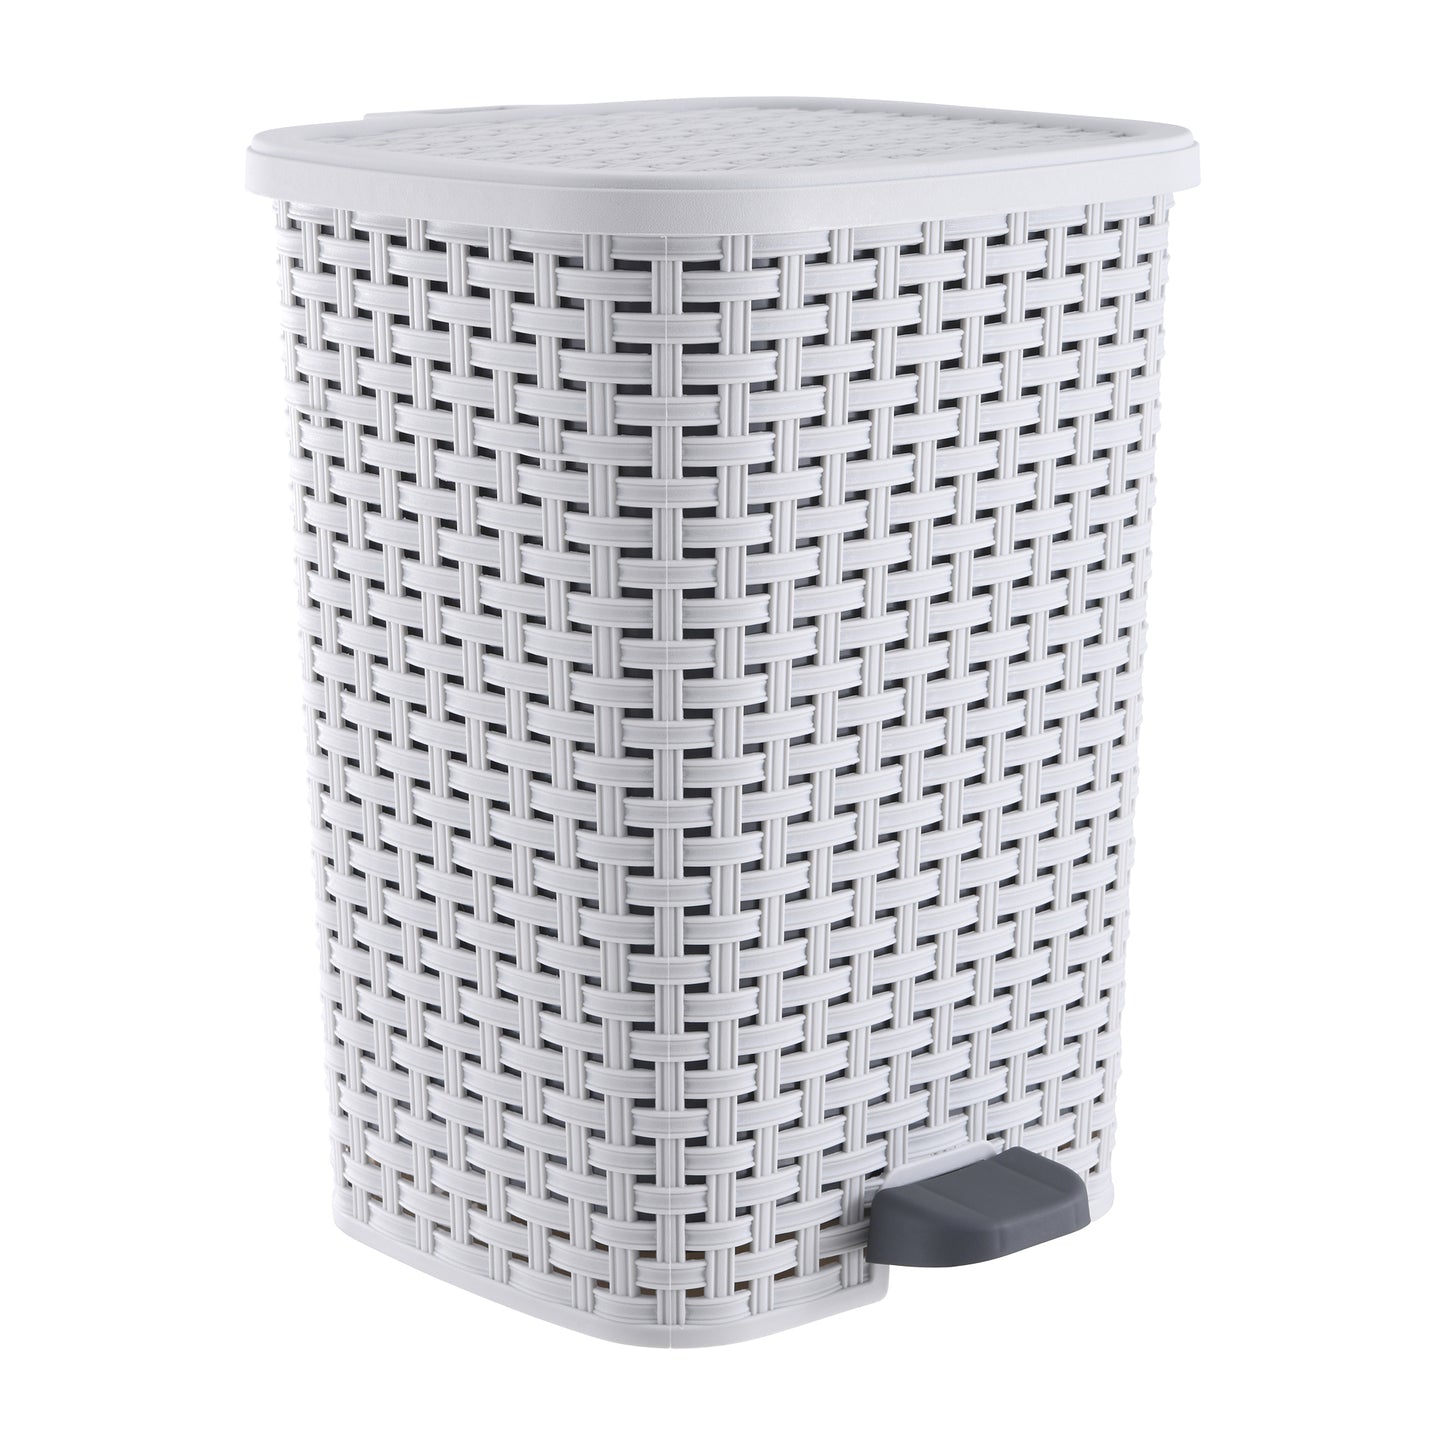 Step-On Trash Can, Wicker Style - White Smoke 27 qt